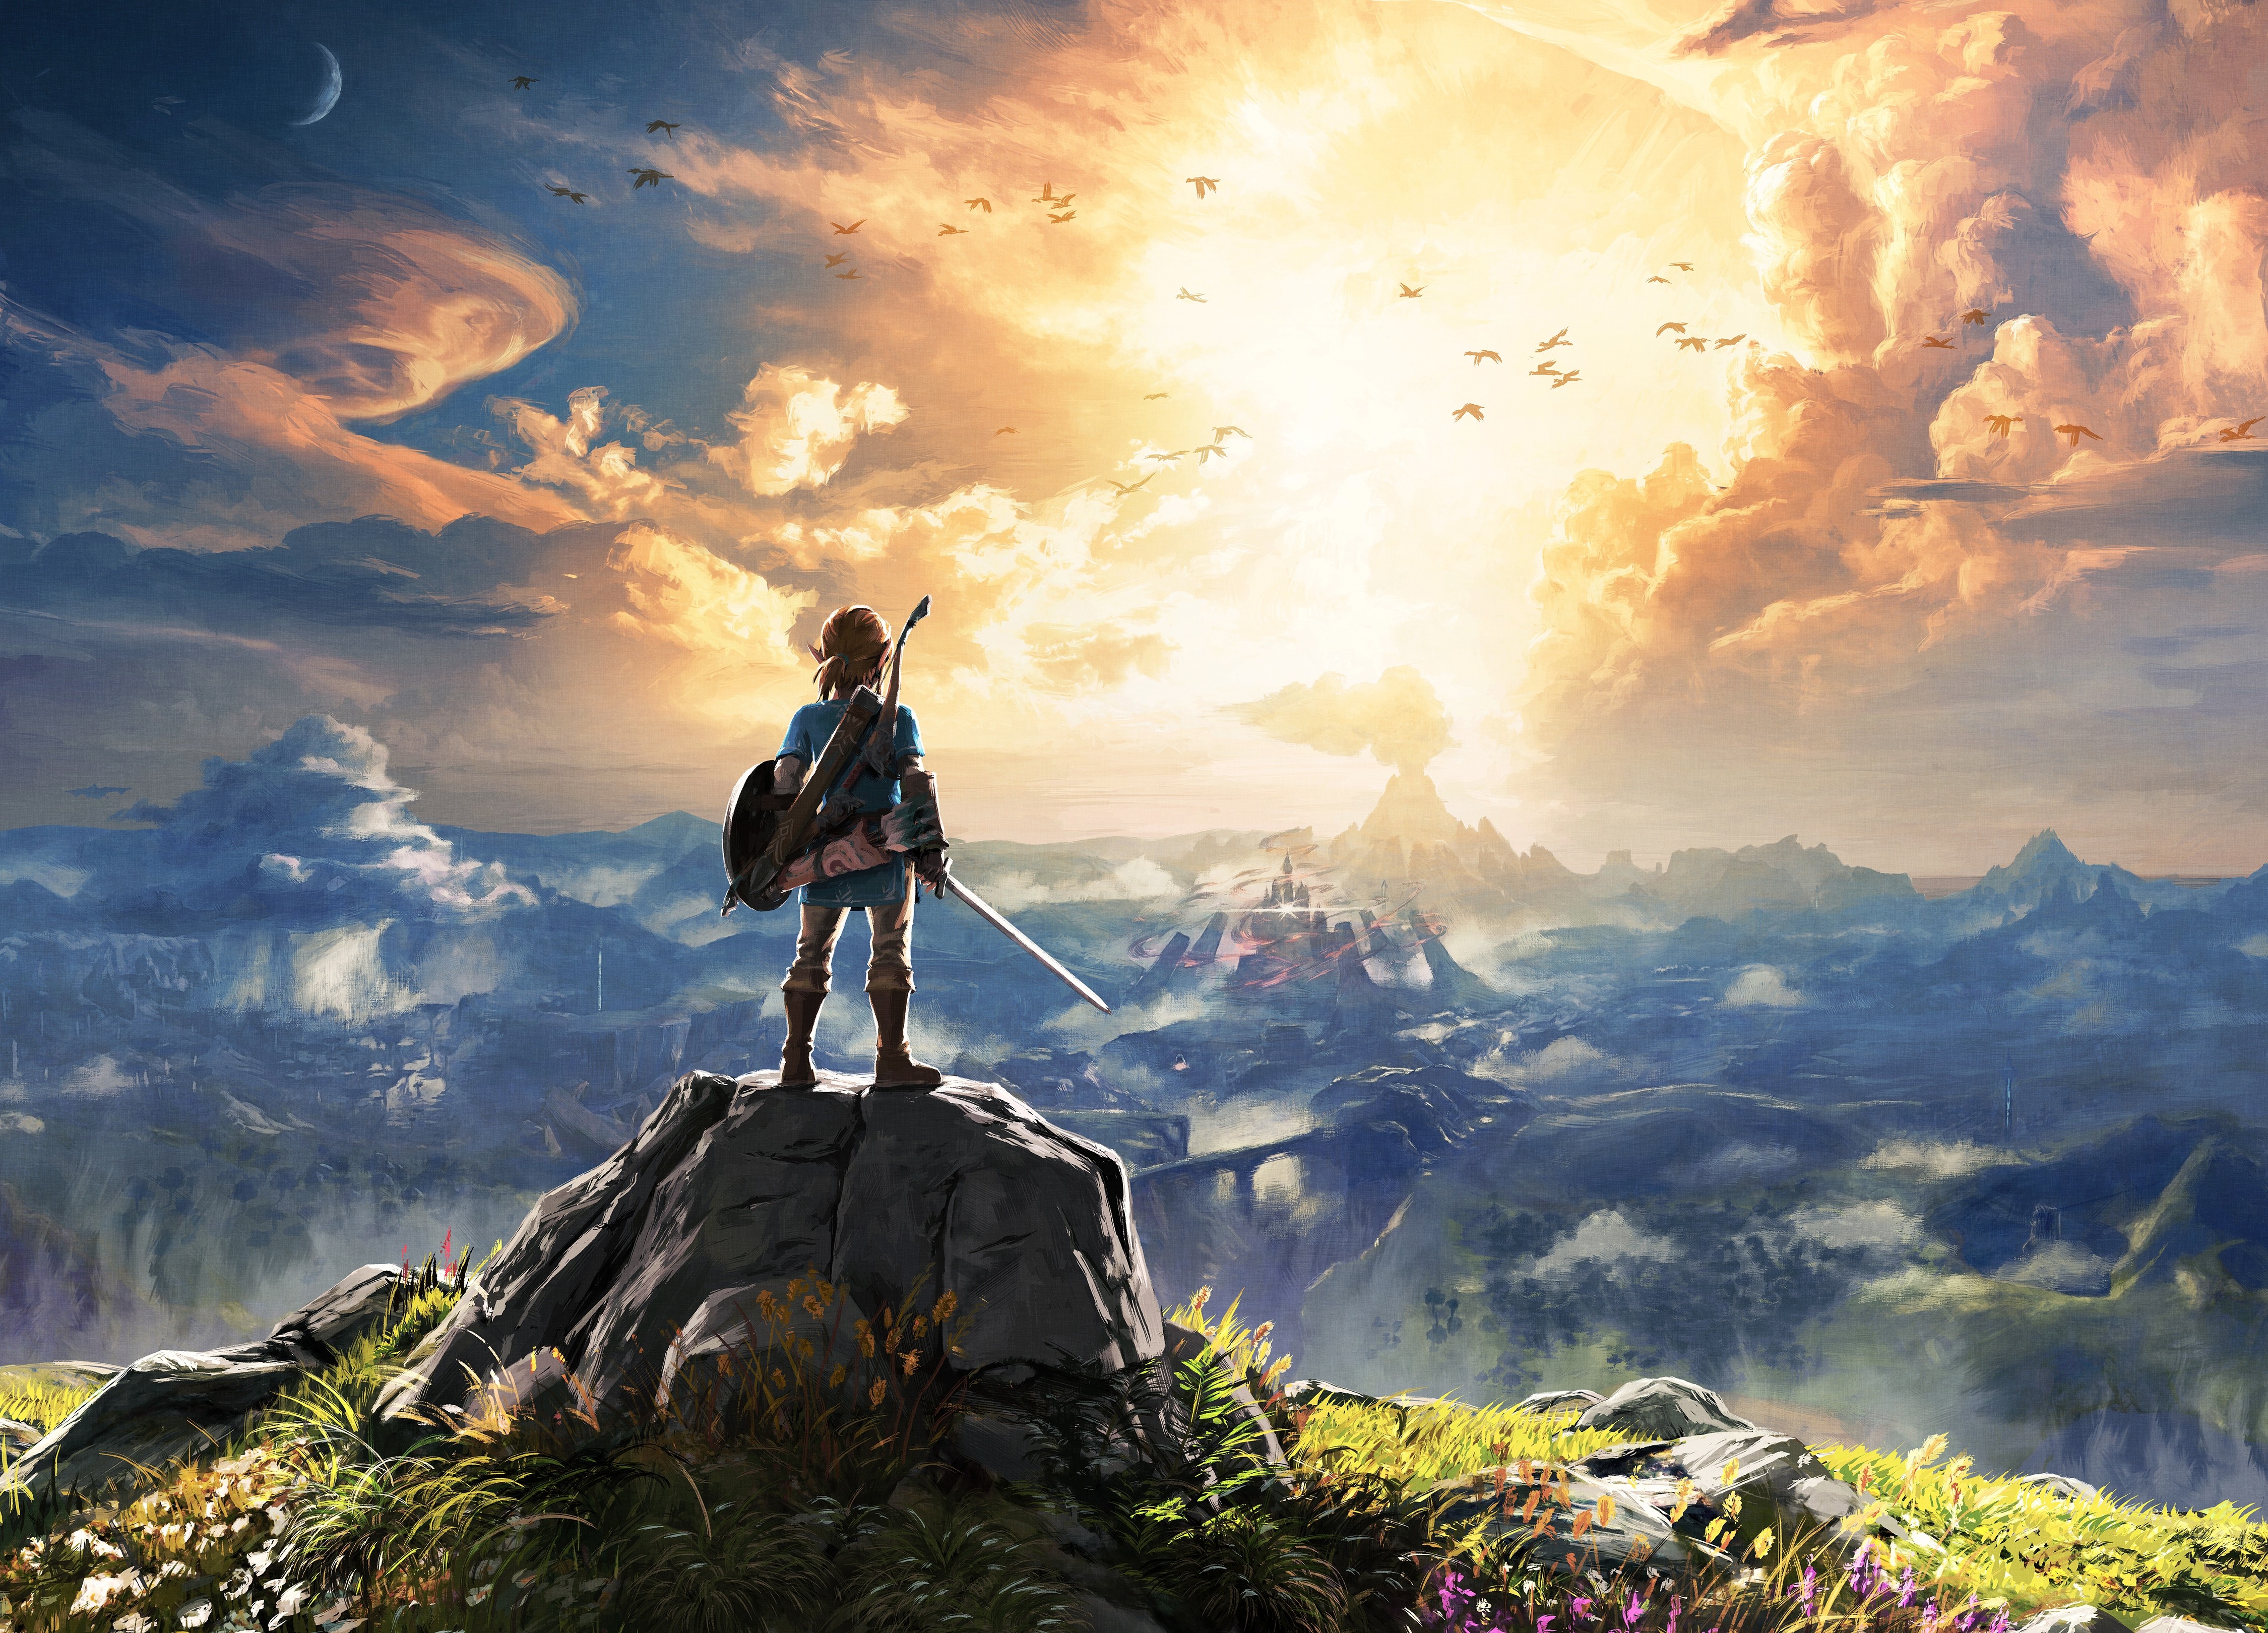 General 4500x3240 The Legend of Zelda: Breath of the Wild The Legend of Zelda Link video games standing video game art sunlight video game characters sword shield sky clouds flowers castle bow and arrow